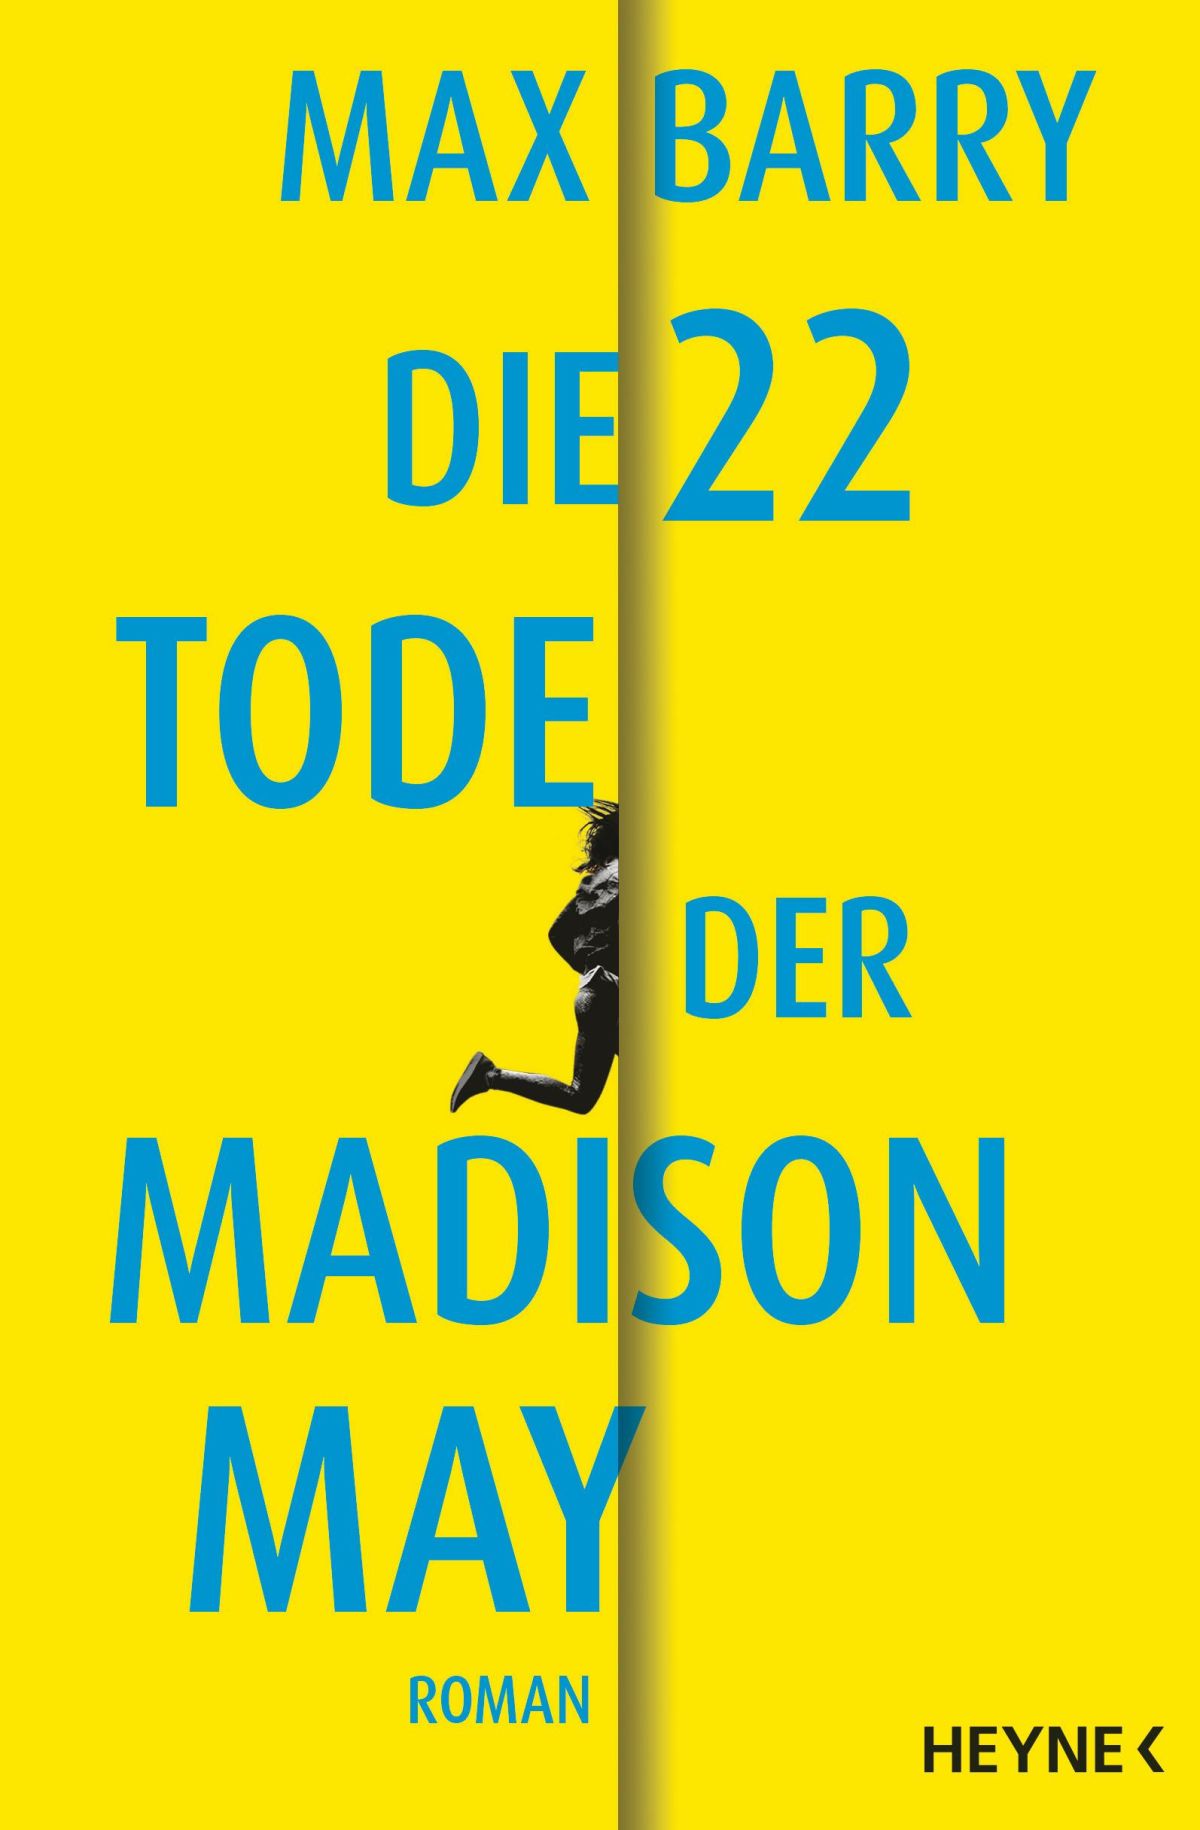 Max Barry - Die 22 Tode der Madison May